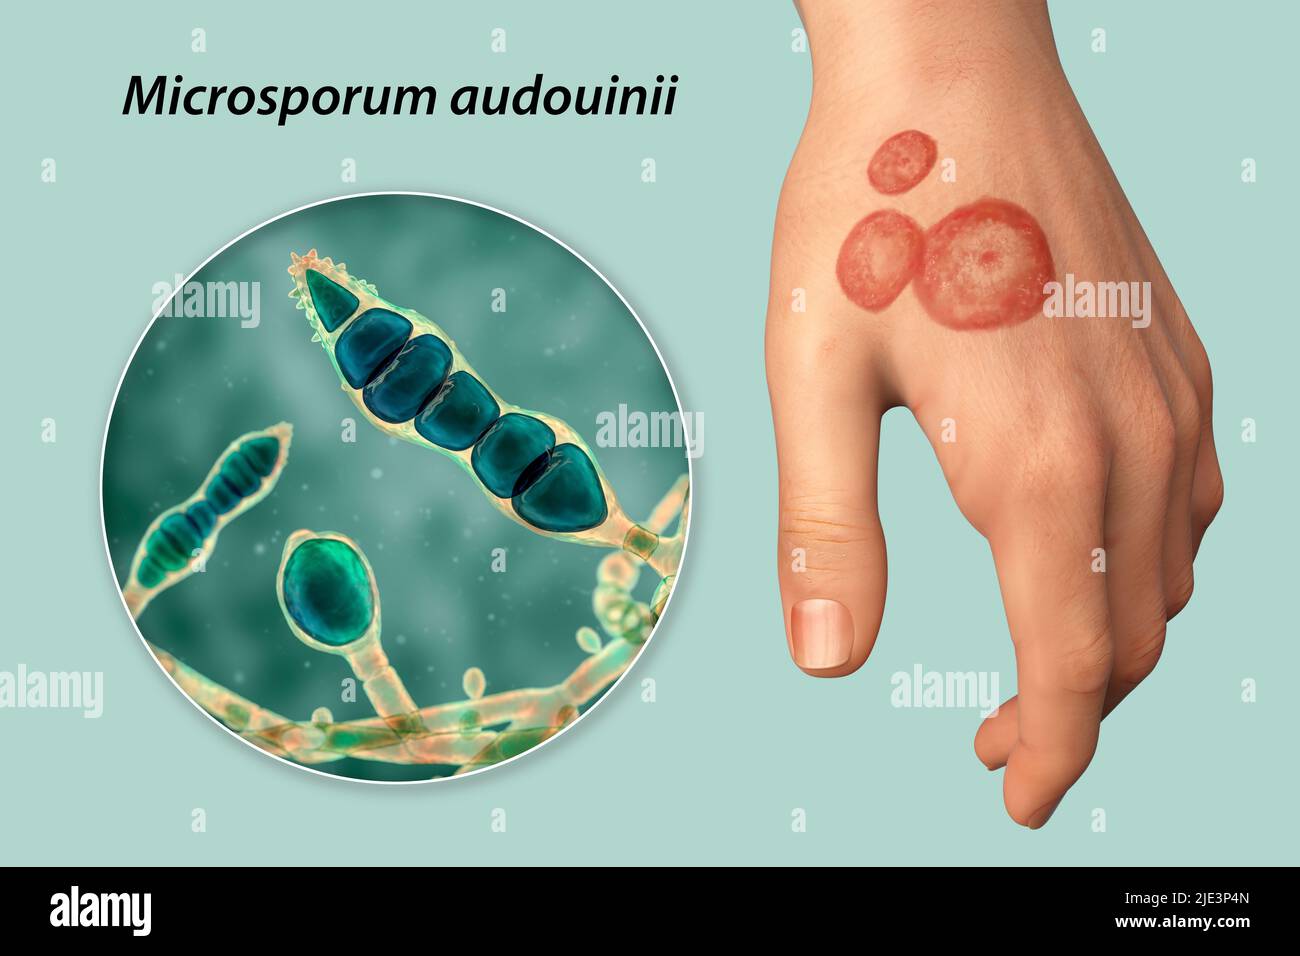 https://c8.alamy.com/comp/2JE3P4N/fungal-infection-on-a-mans-hand-illustration-known-as-ringworm-infection-or-tinea-manuum-it-can-be-caused-by-various-fungi-including-microsporum-audouinii-it-causes-severe-itching-the-disease-is-highly-contagious-and-can-be-spread-by-direct-contact-or-by-contact-with-contaminated-material-treatment-is-with-antifungal-drugs-2JE3P4N.jpg